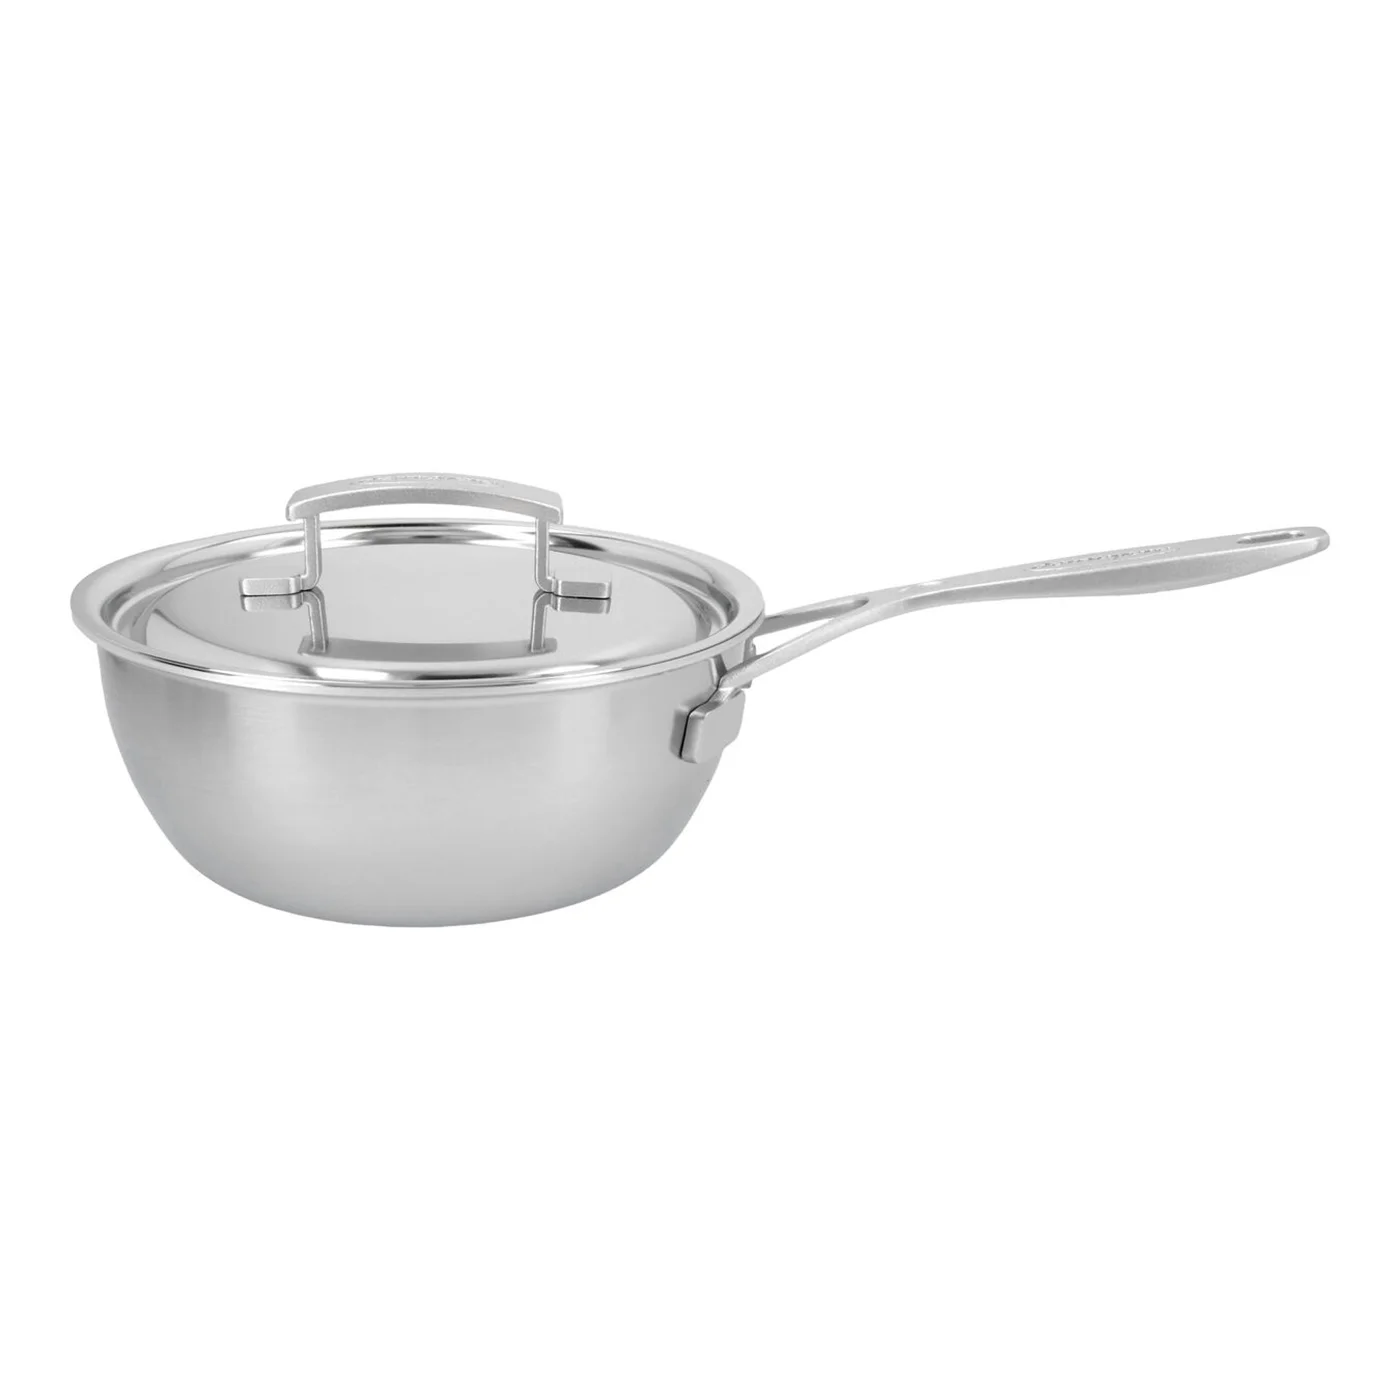 Industry 2 Qt 5-Ply Stainless Steel Saucepan with Lid